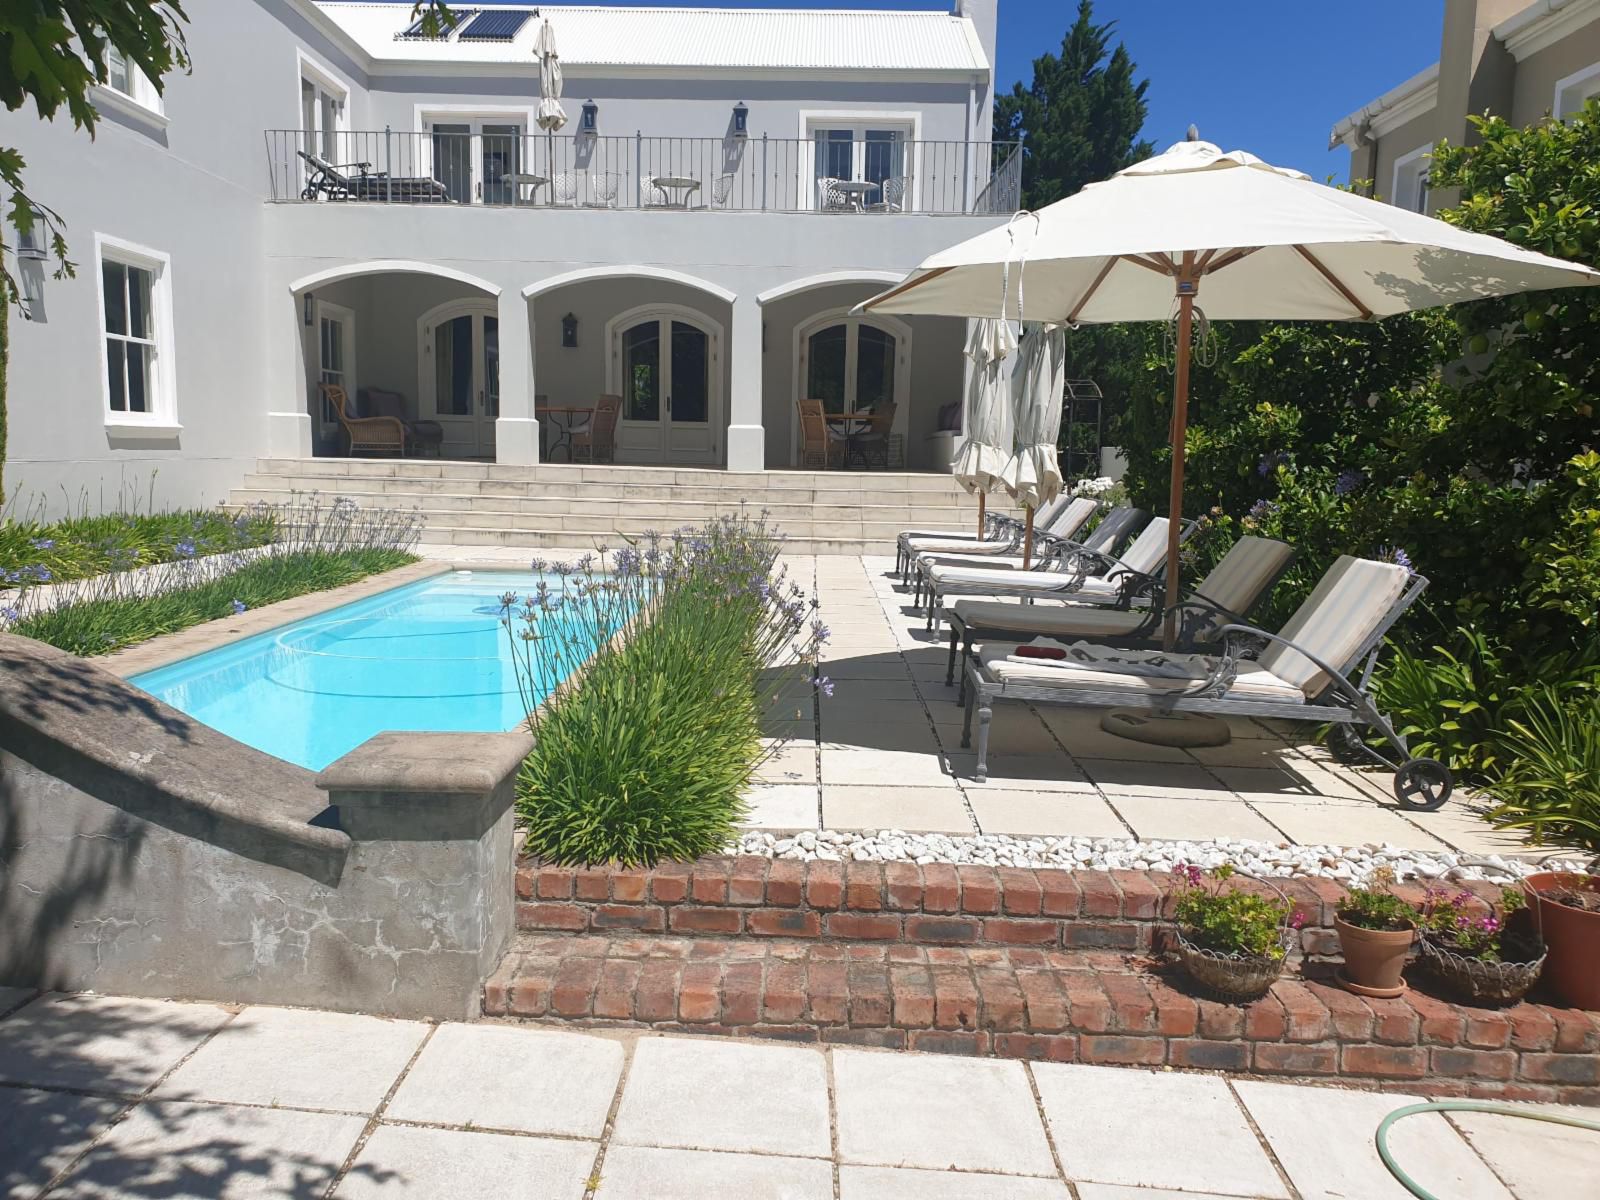 Maison D Ail Guest House Franschhoek Western Cape South Africa House, Building, Architecture, Swimming Pool